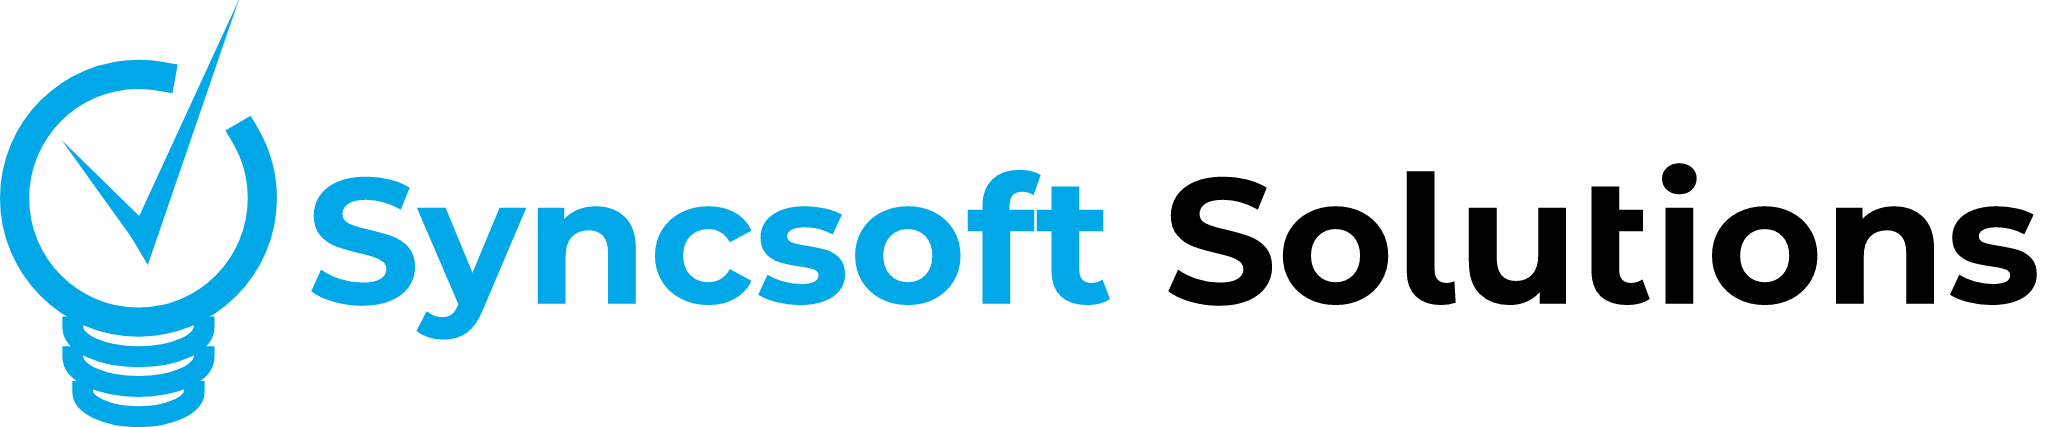 Syncsoft Solutions | Welcome